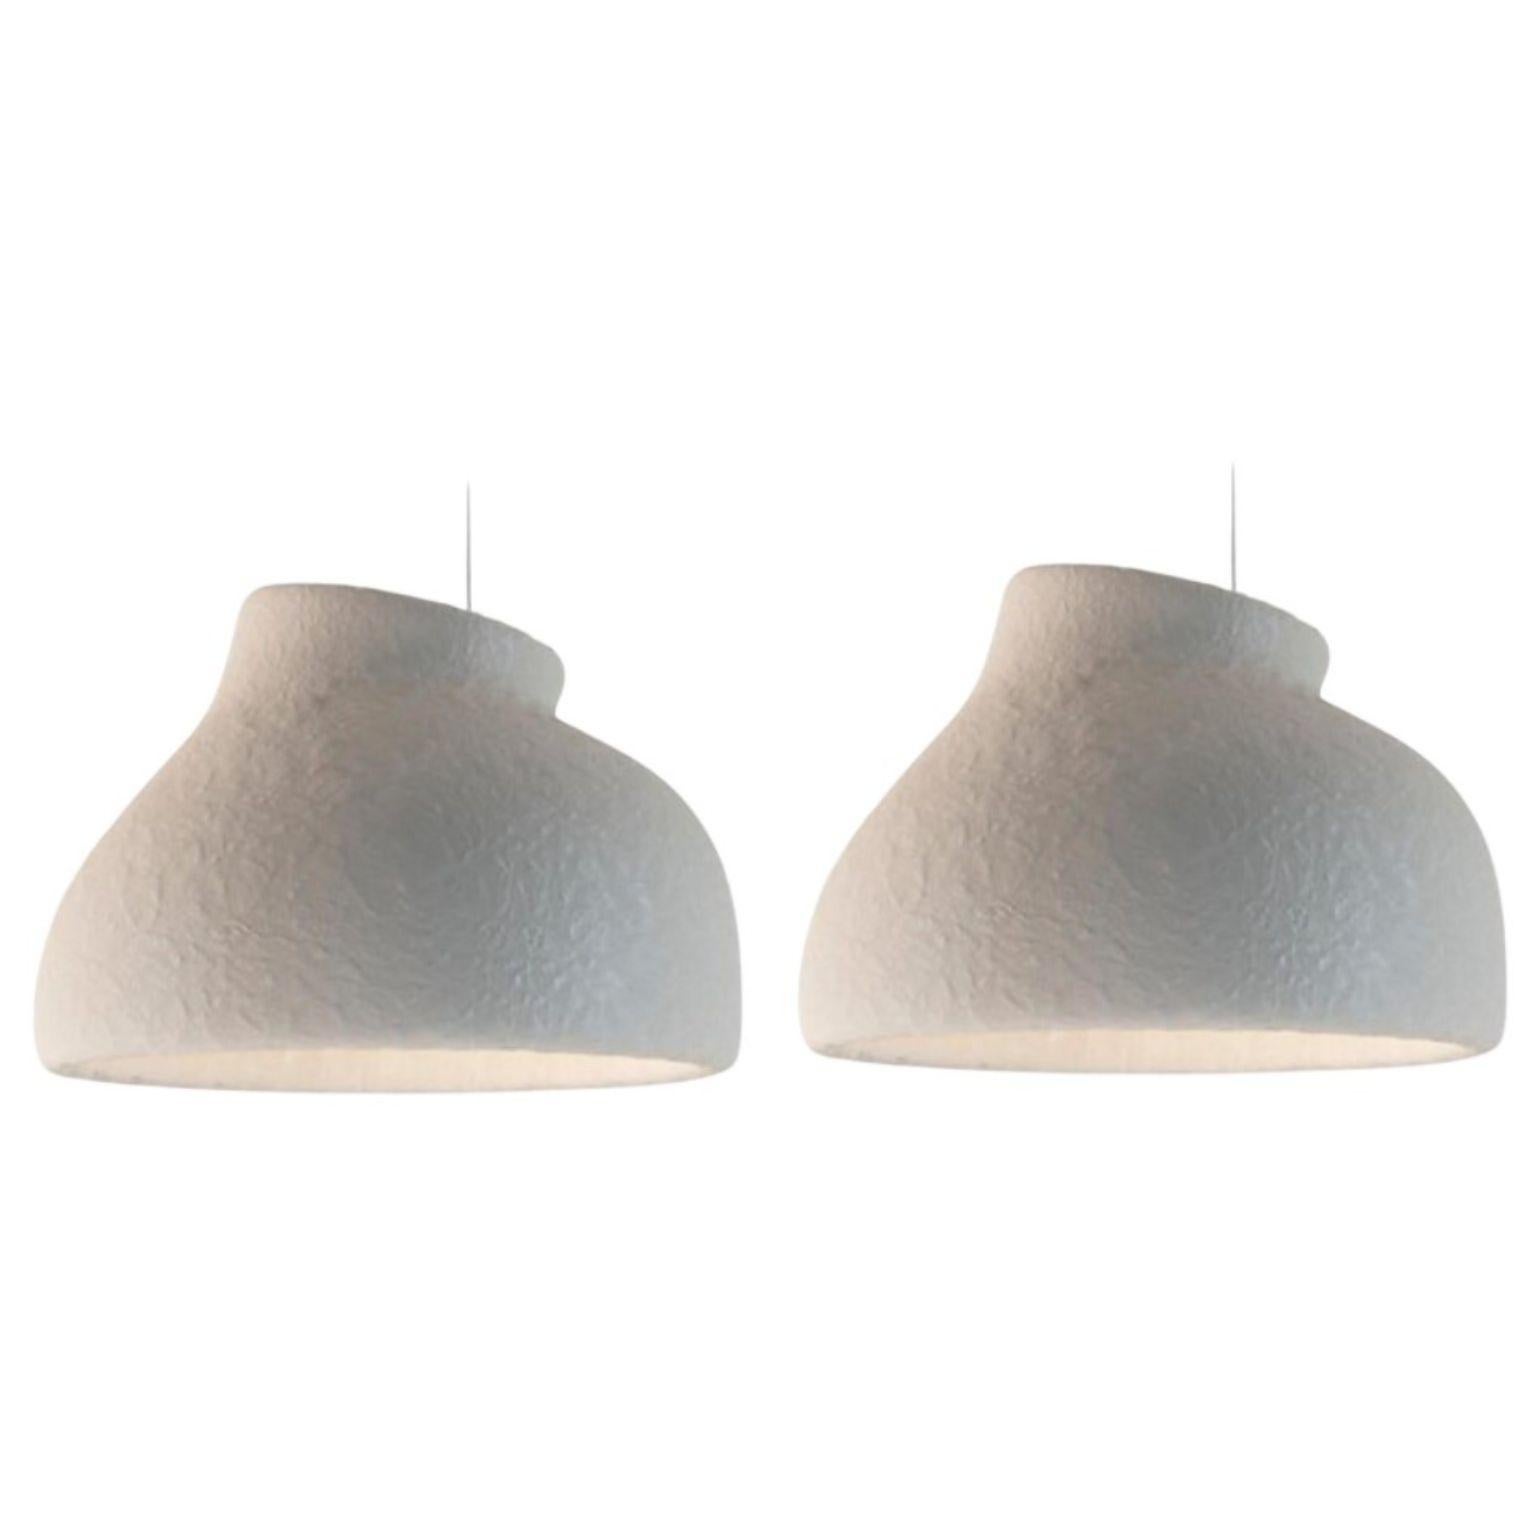 Set of 2 big pendant lamps by Faina
Design: Victoriya Yakusha
Materials: A blend of upcycled steel, flax rubber, wood chips, cellulose, and clay all with biopolymer cover
Dimensions: D 100 x H 72 cm
Available in 12 colours.

Soniah tends